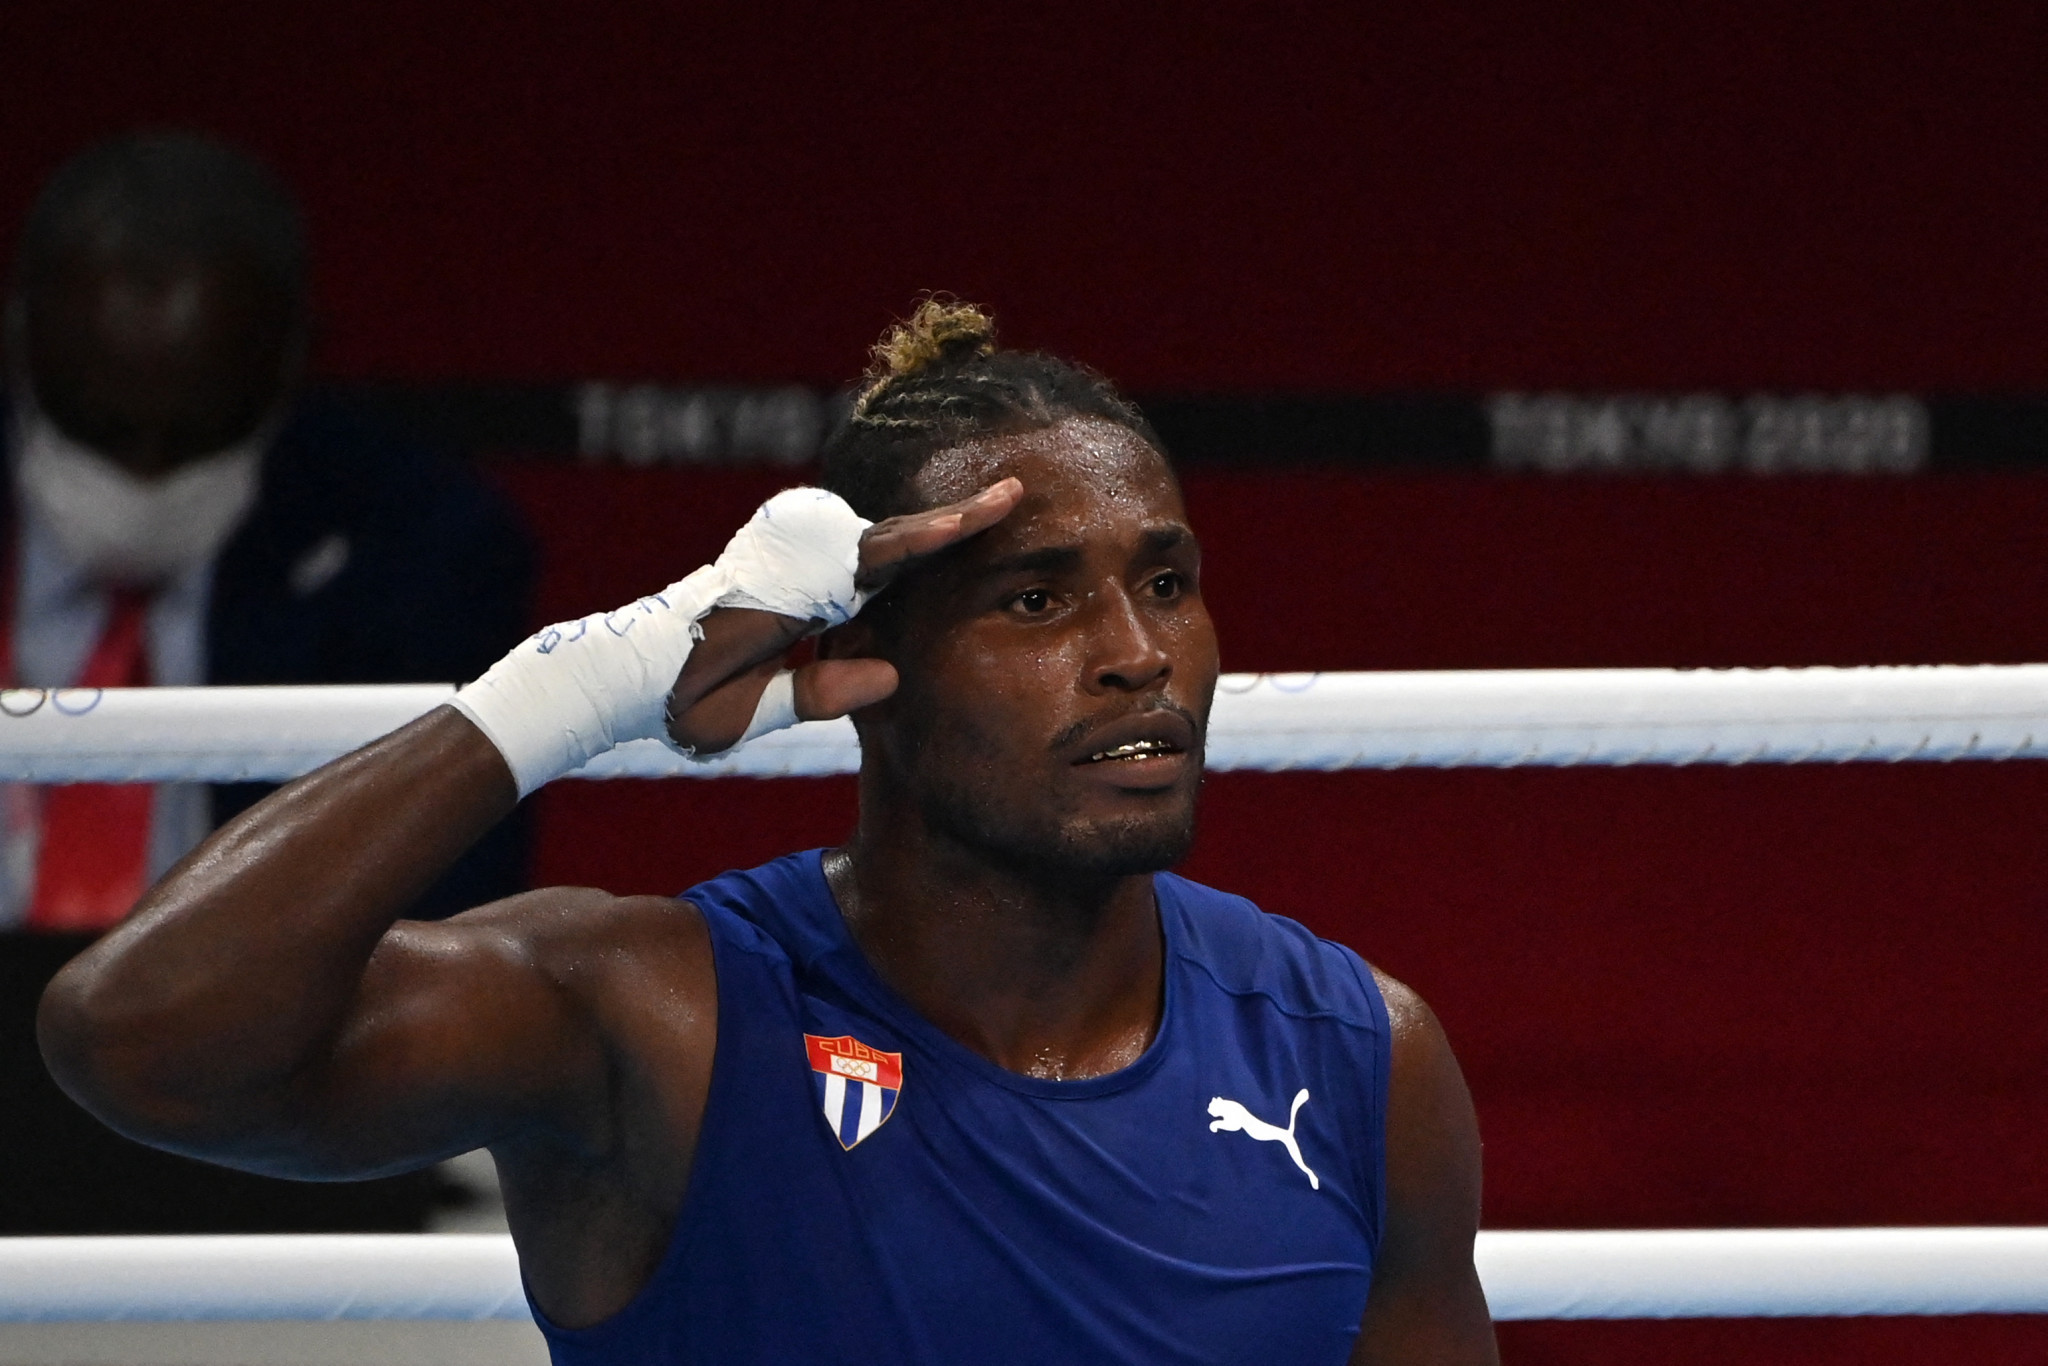 Julio César La Cruz of Cuba is among the seven defending champions set to take part at the IBA Men's World Boxing Championships ©Getty Images